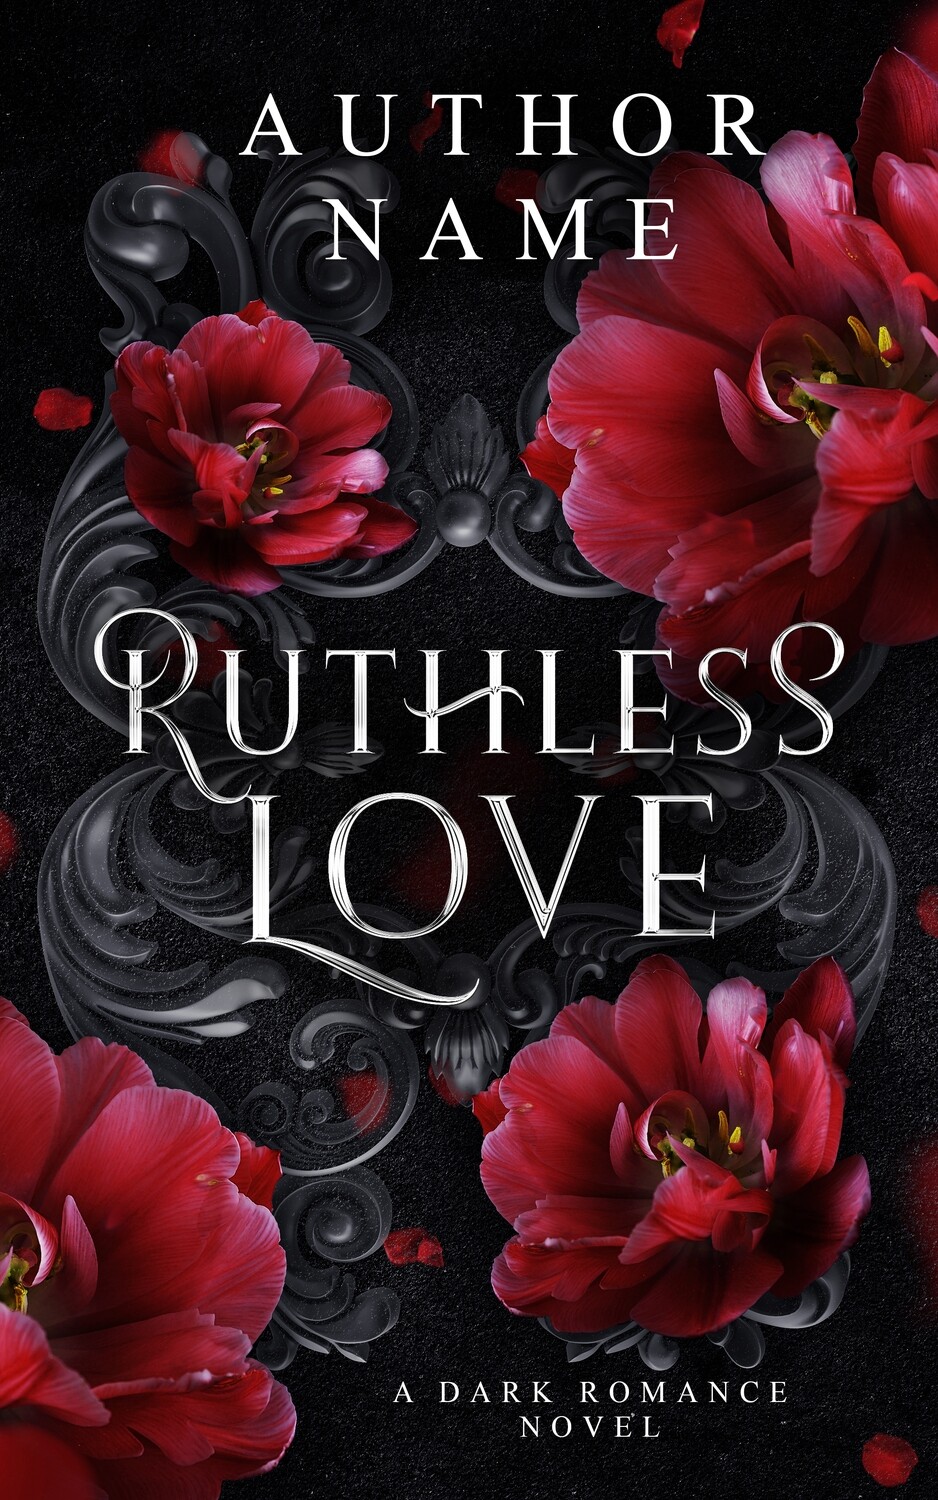 RUTHLESS LOVE